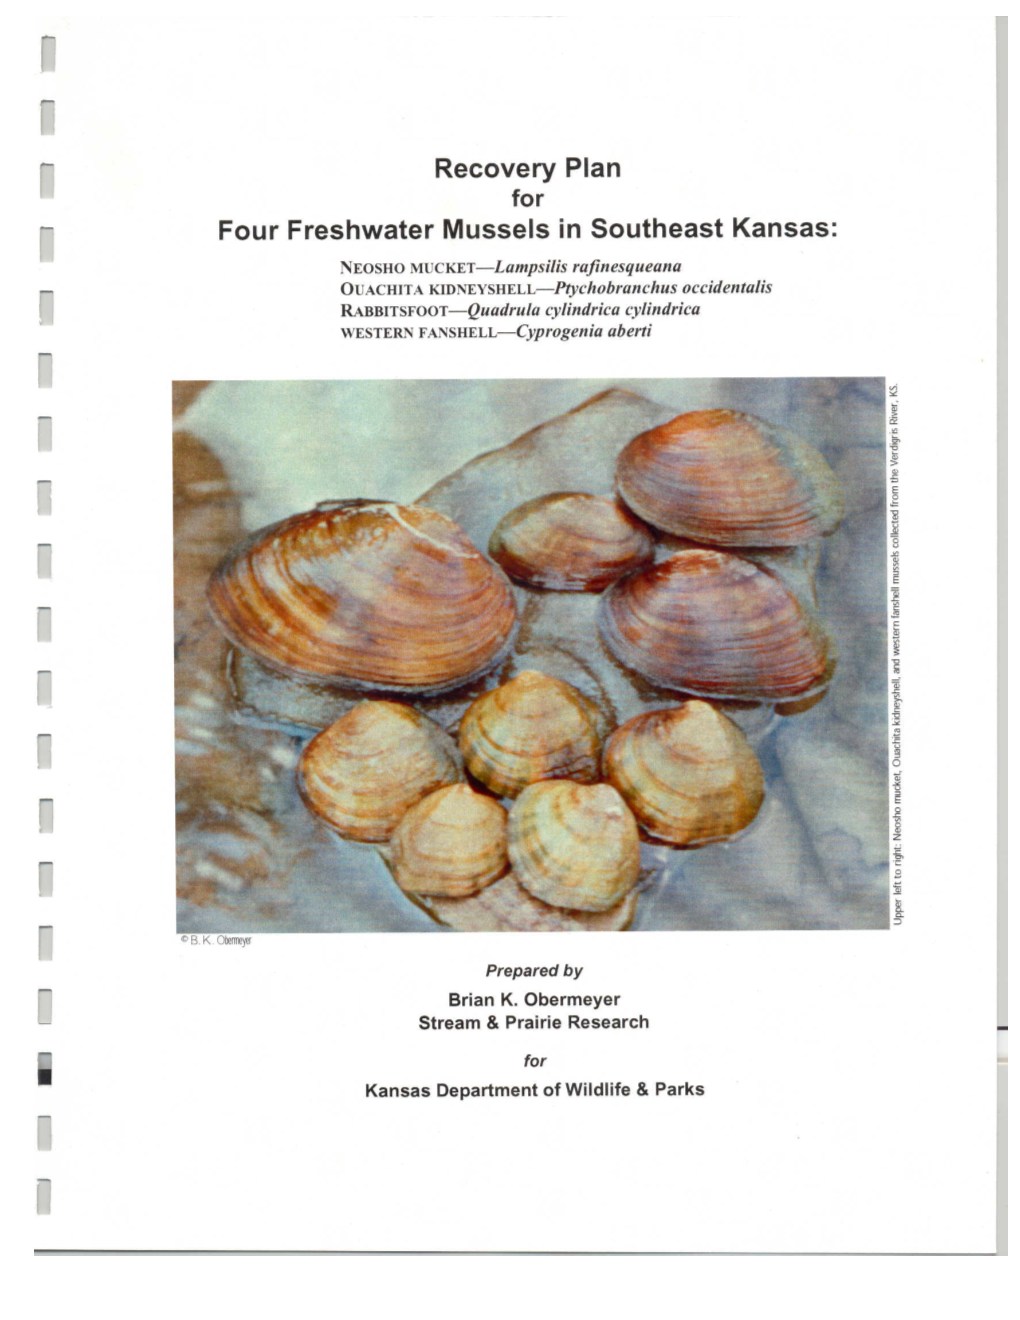 Final Copy of 4 Mussels Recovery Plan